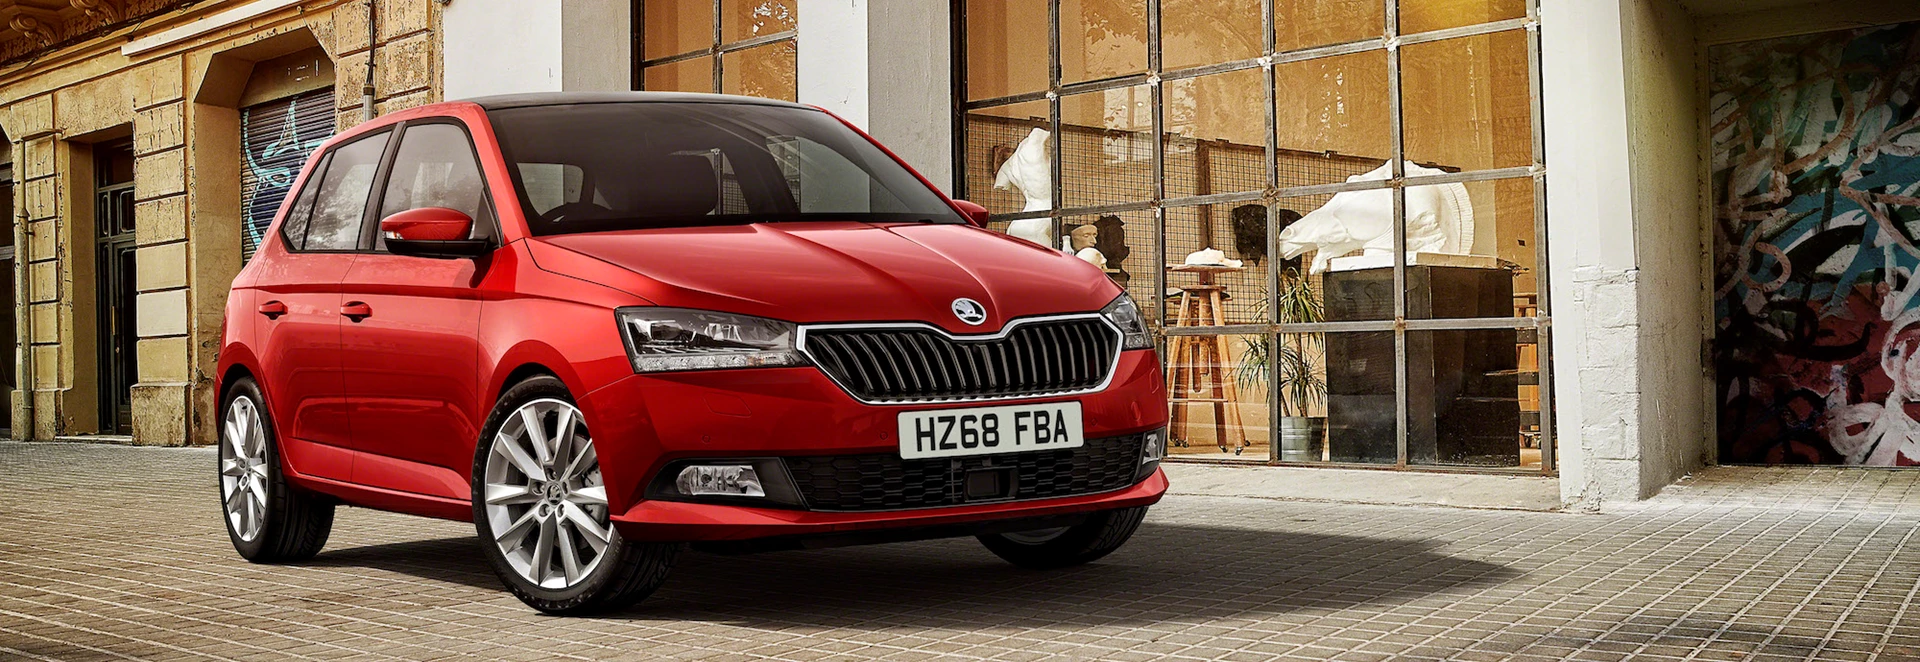 What to know about the 2018 Skoda Fabia